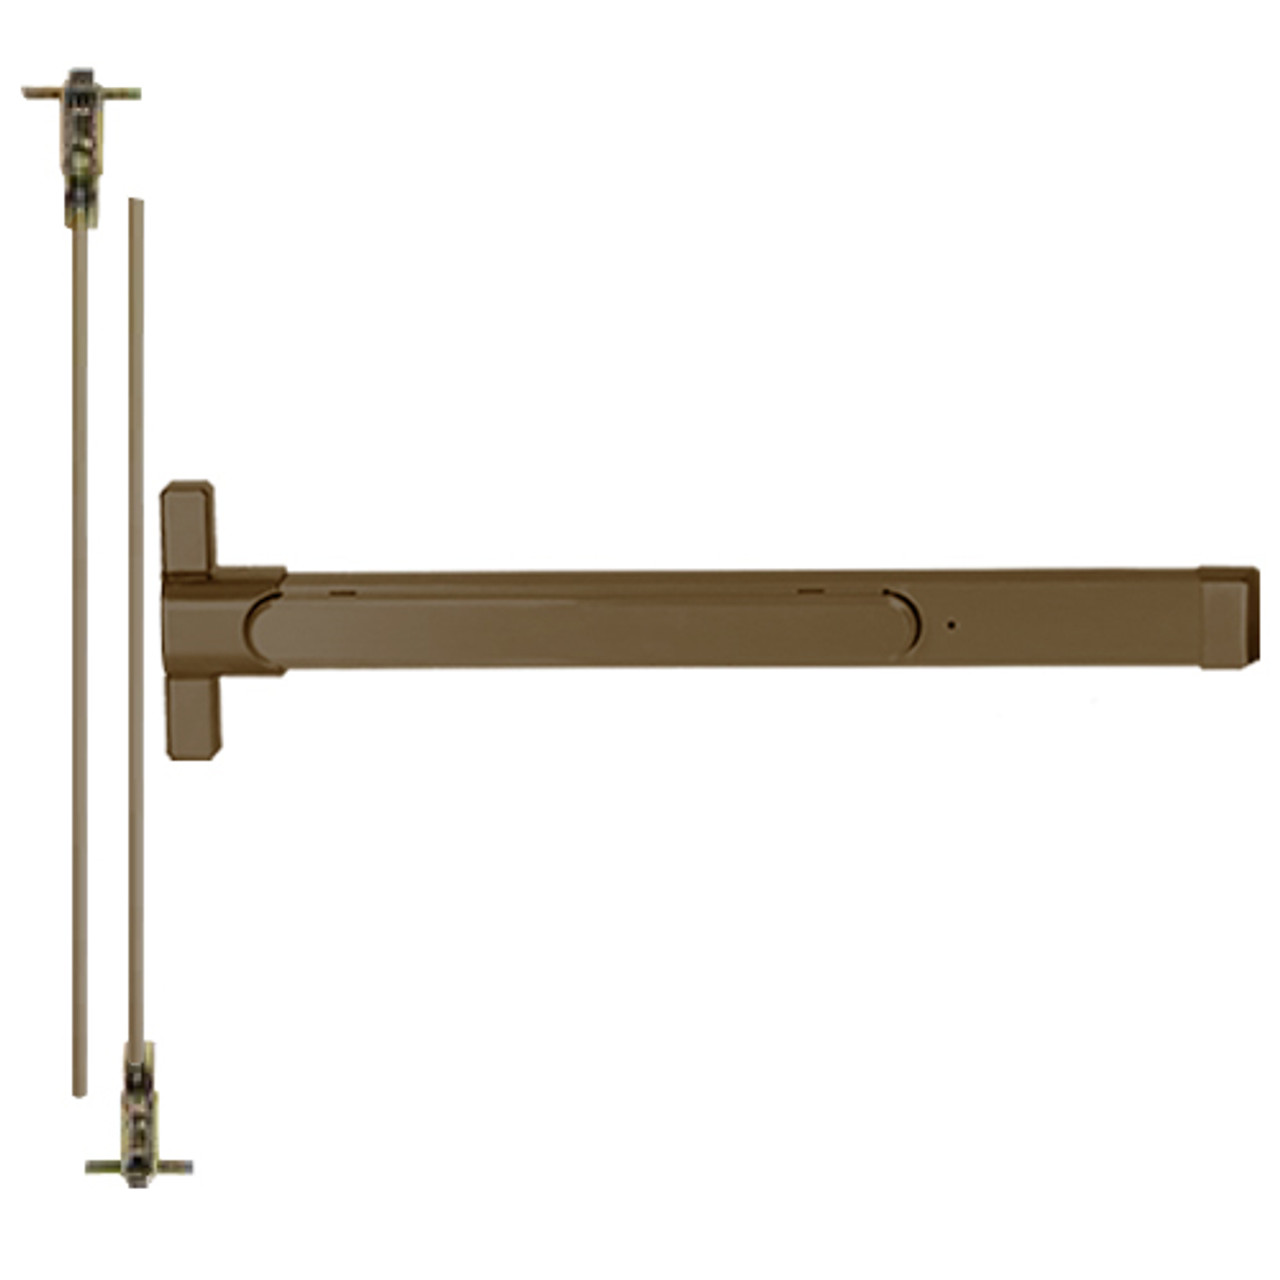 QED227-48-8-313AN Stanley QED200 Series Heavy Duty Narrow Stile Concealed Vertical Rod Hex Dog Exit Device in Anodized Duranodic Bronze Finish